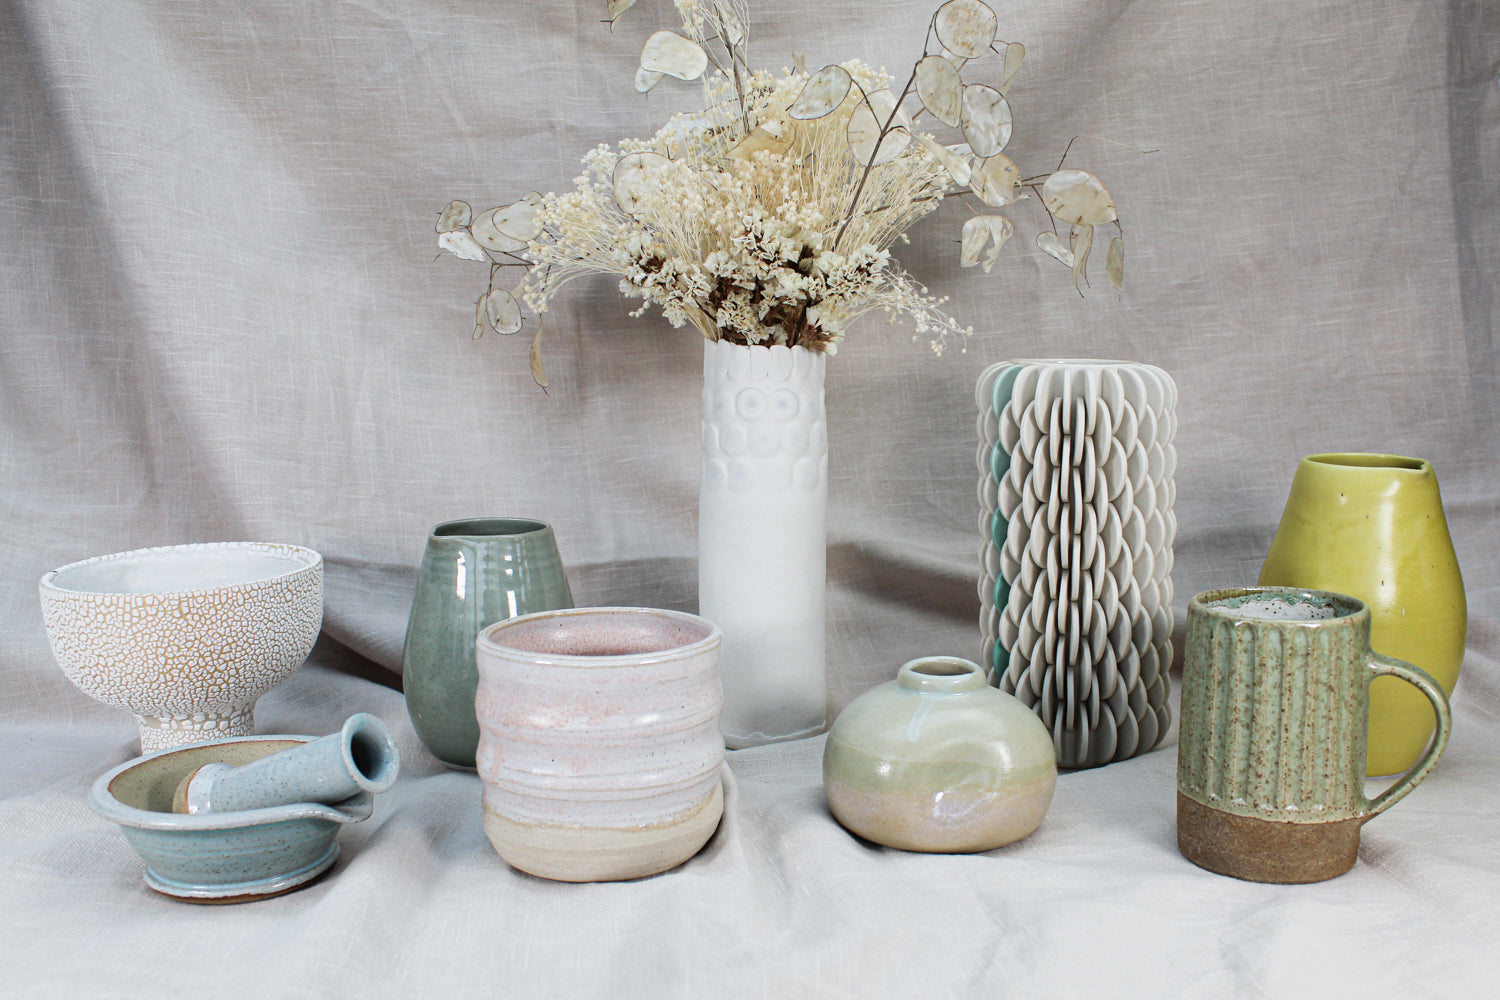 9 Reasons to Switch From Mass Produced to Handmade Pottery Homeware